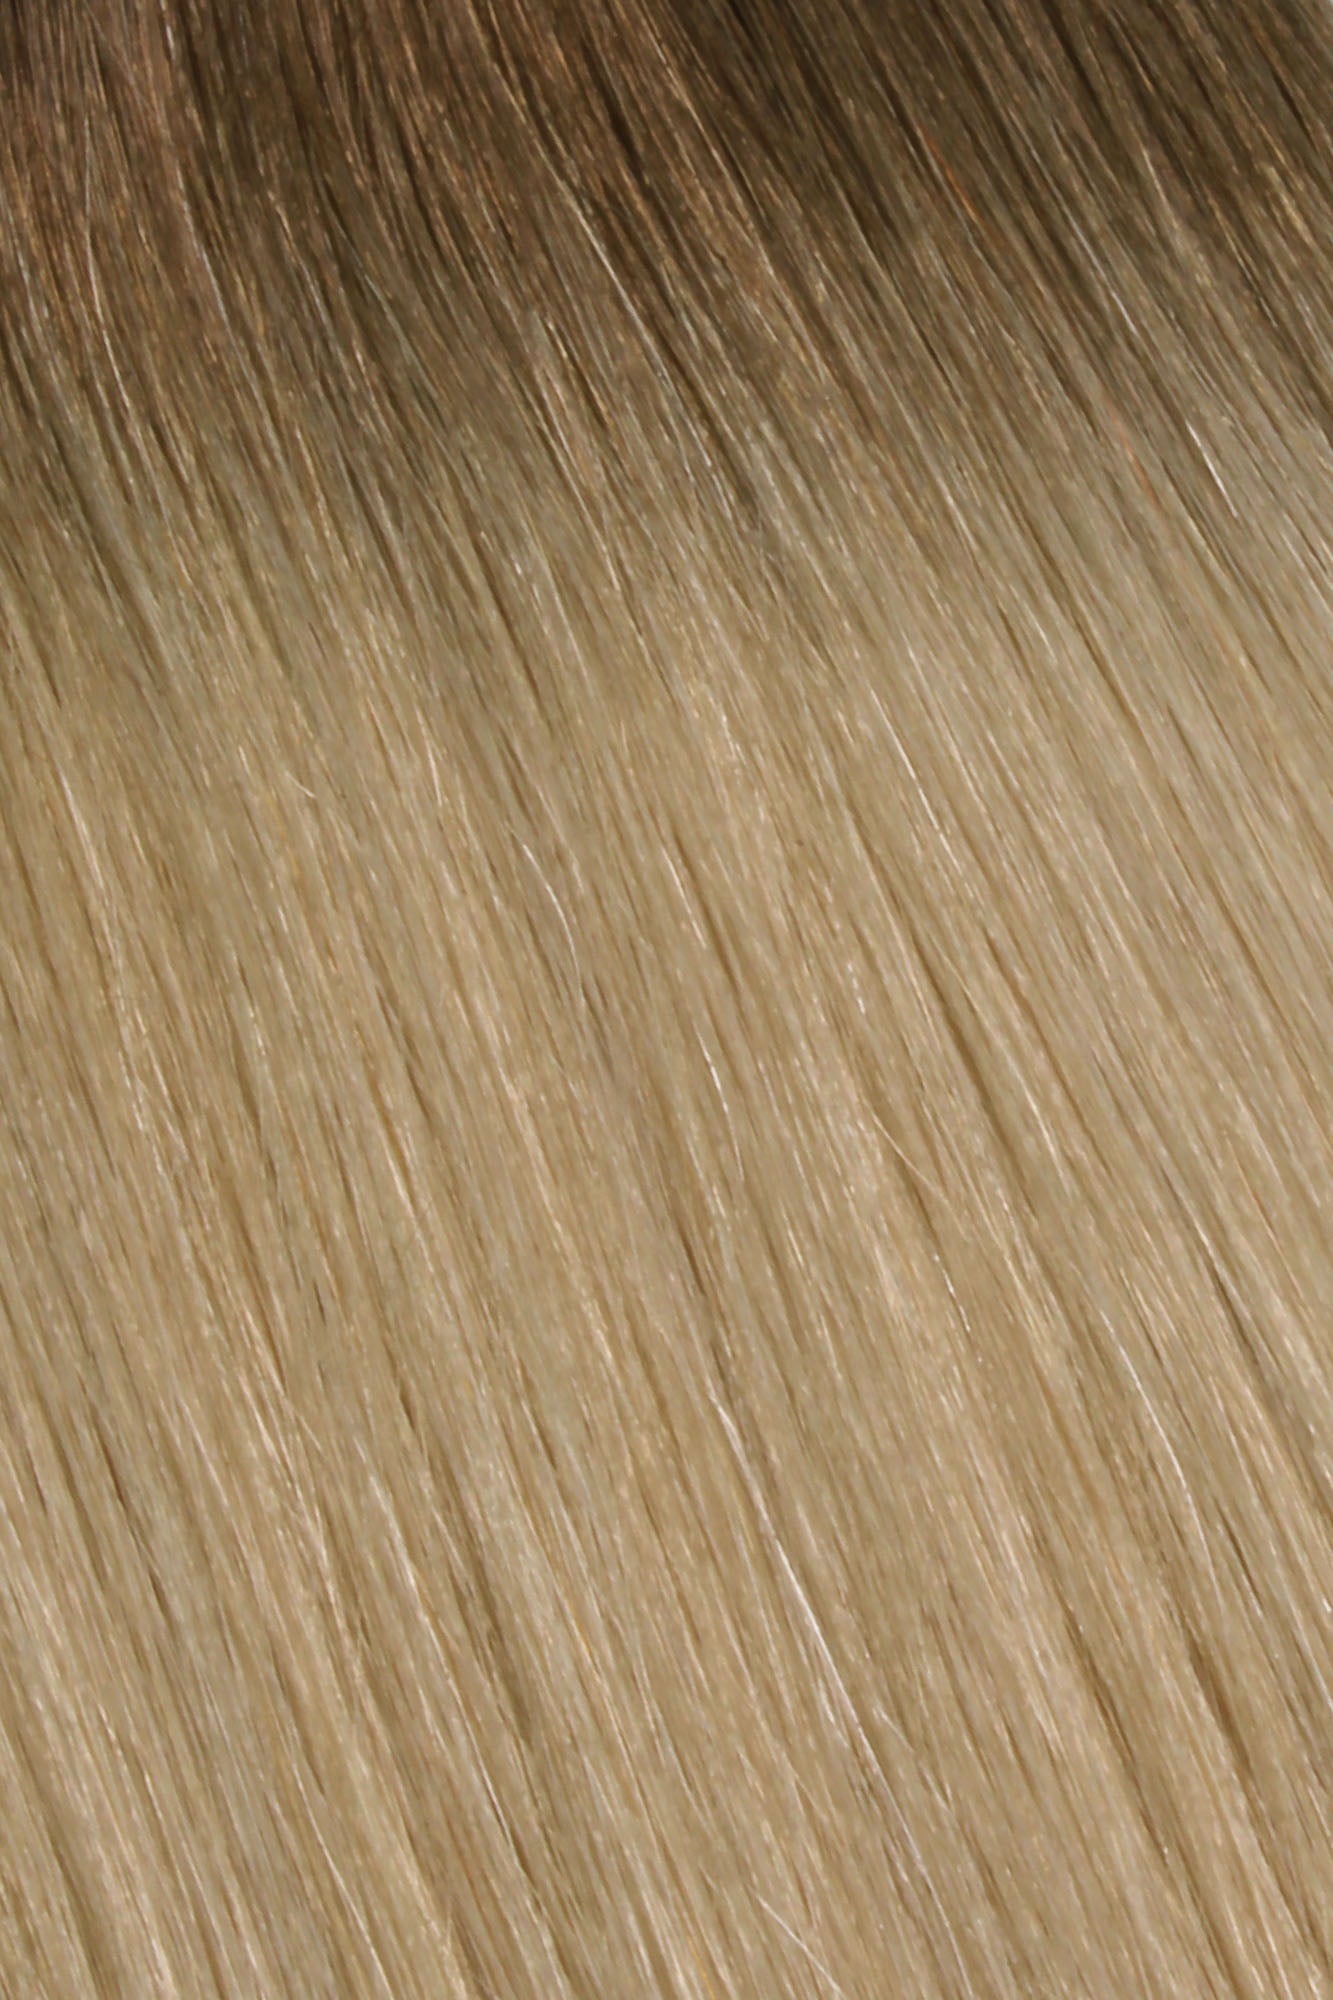 SEAMLESS® Flat Weft 24 Inches - SWAY Hair Extensions Rooted-Beach-Ash-Blonde-R5-9-613 Natural SEAMLESS® Flat Weft 24 Inches extensions. Thin, flexible, and discreet. 100% Double Drawn Remy Human Hair. Versatile and reusable